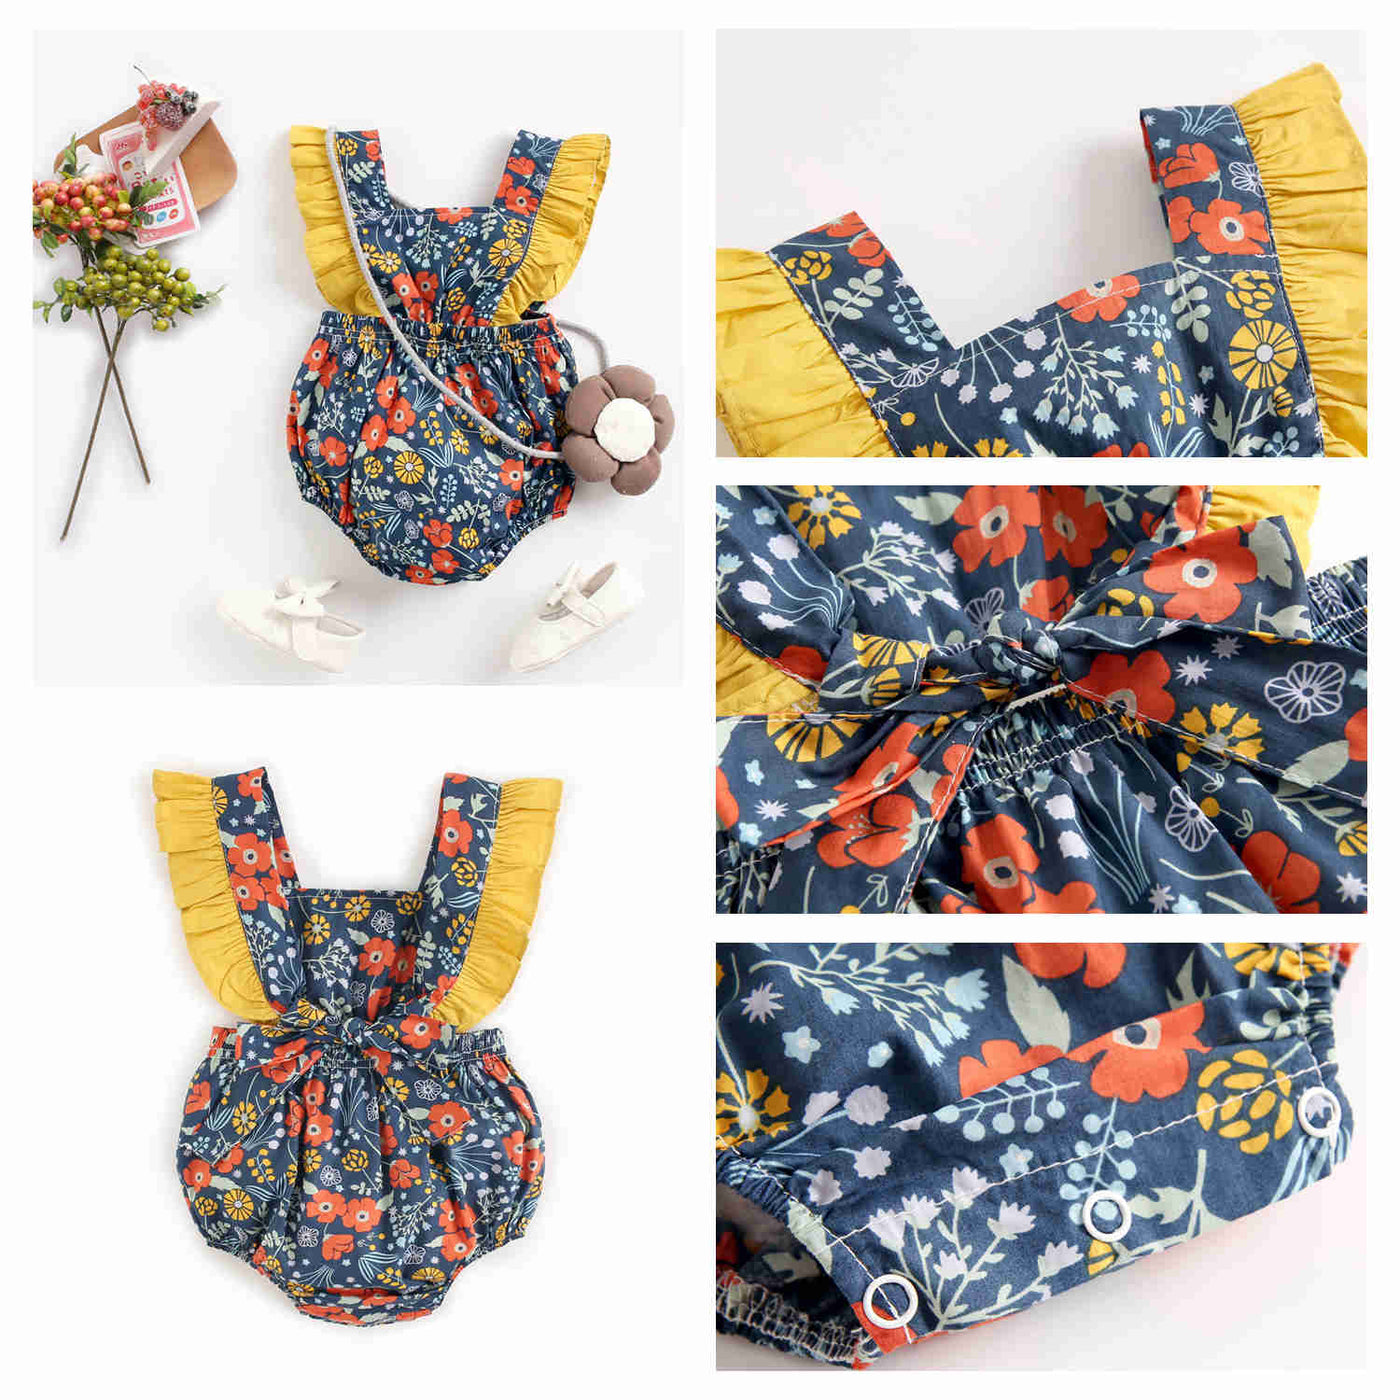 Flower Romper 0-3yrs Jumpsuit - Coco Potato - dresses and partywear for little girls